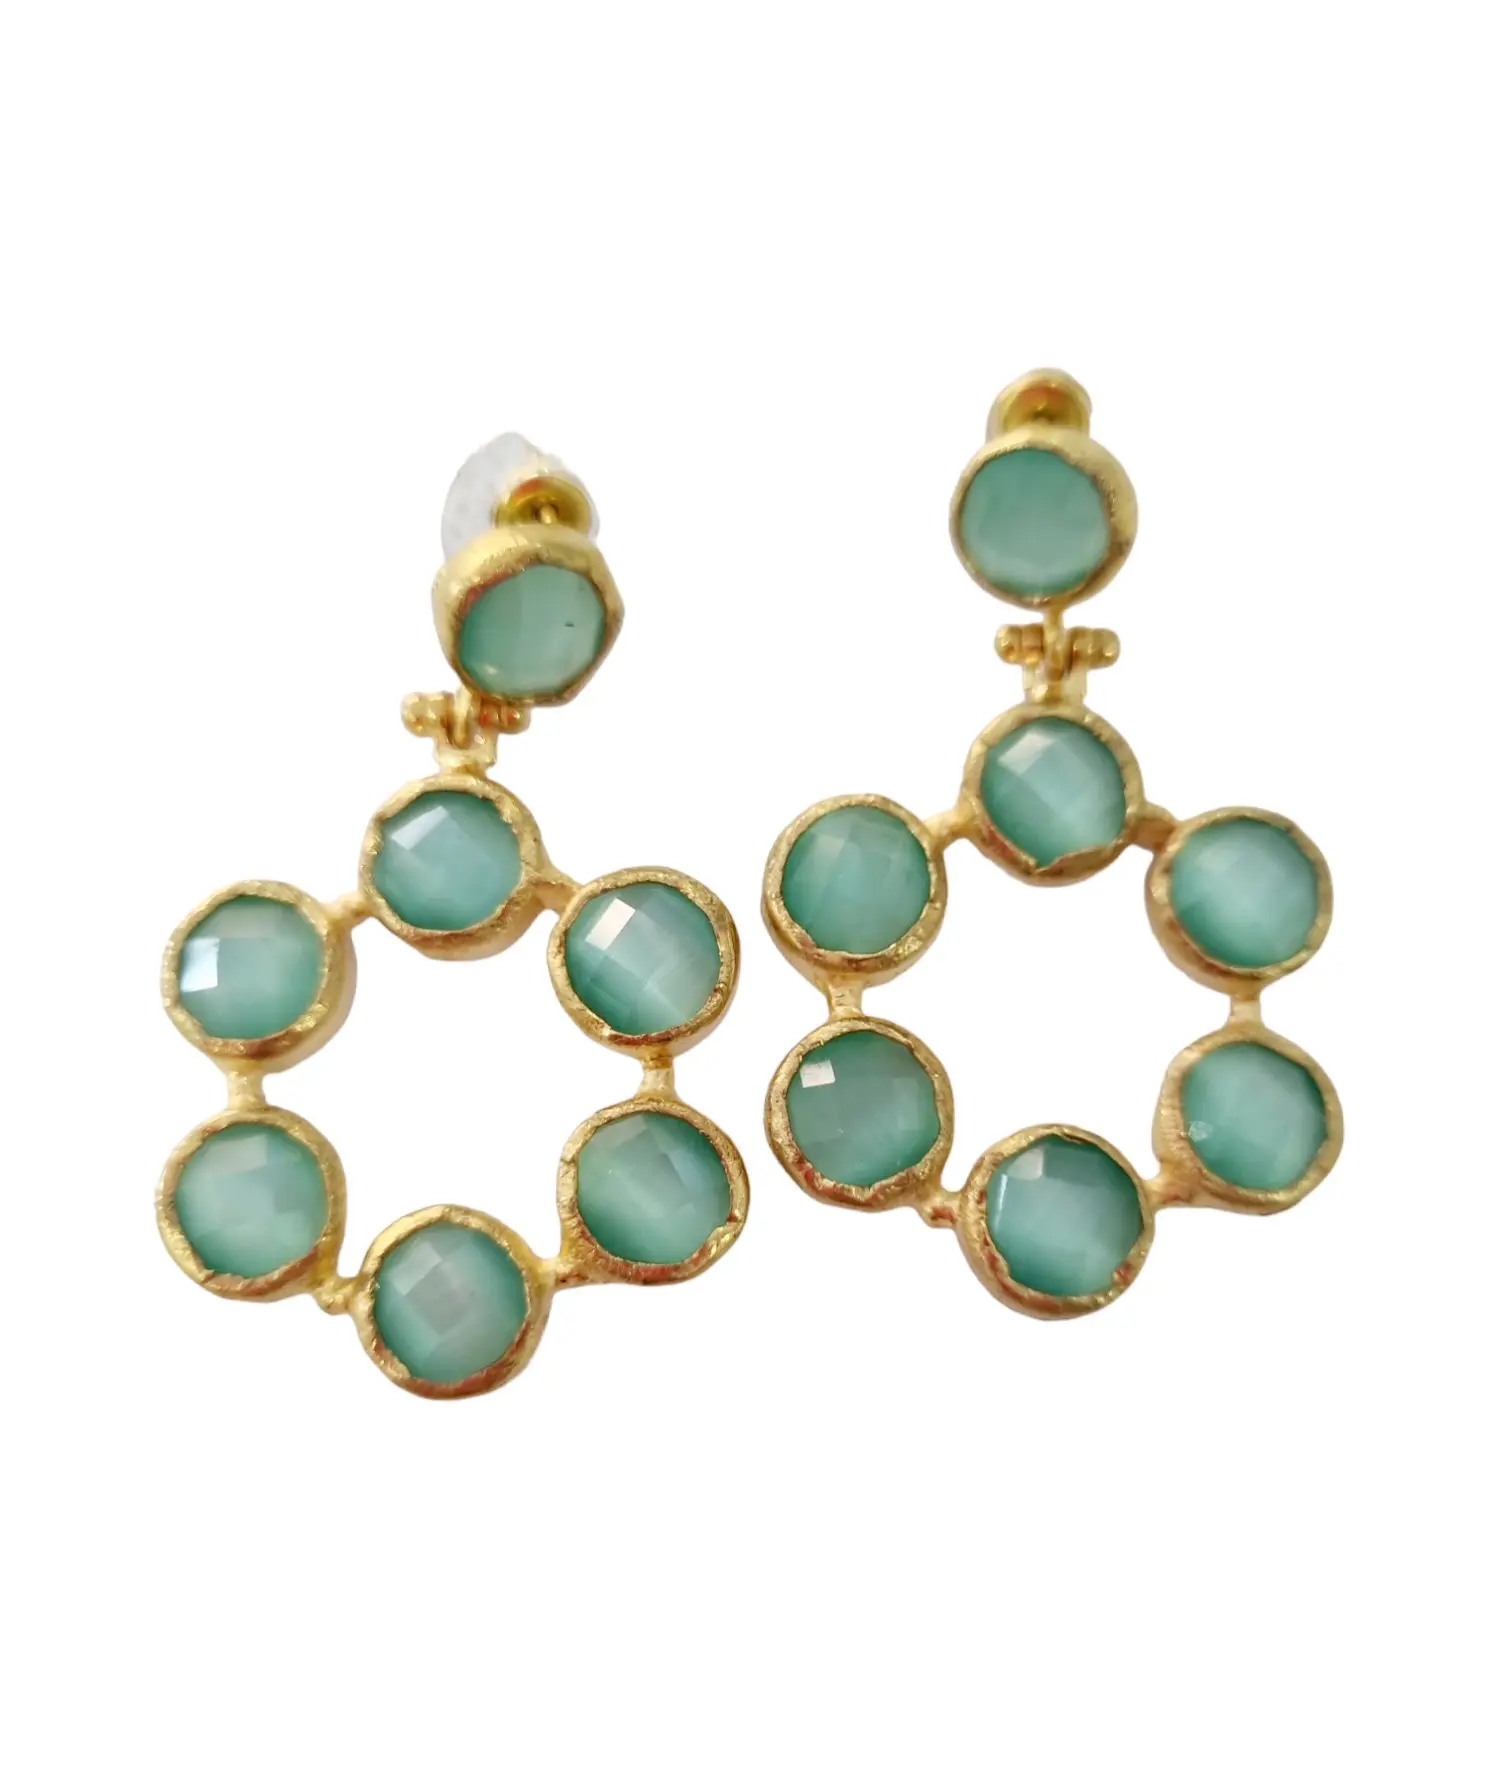 Earrings made with a cat's eye surrounded by brass. Aqua green colour. Length 4.5cm Weight 7.3gr